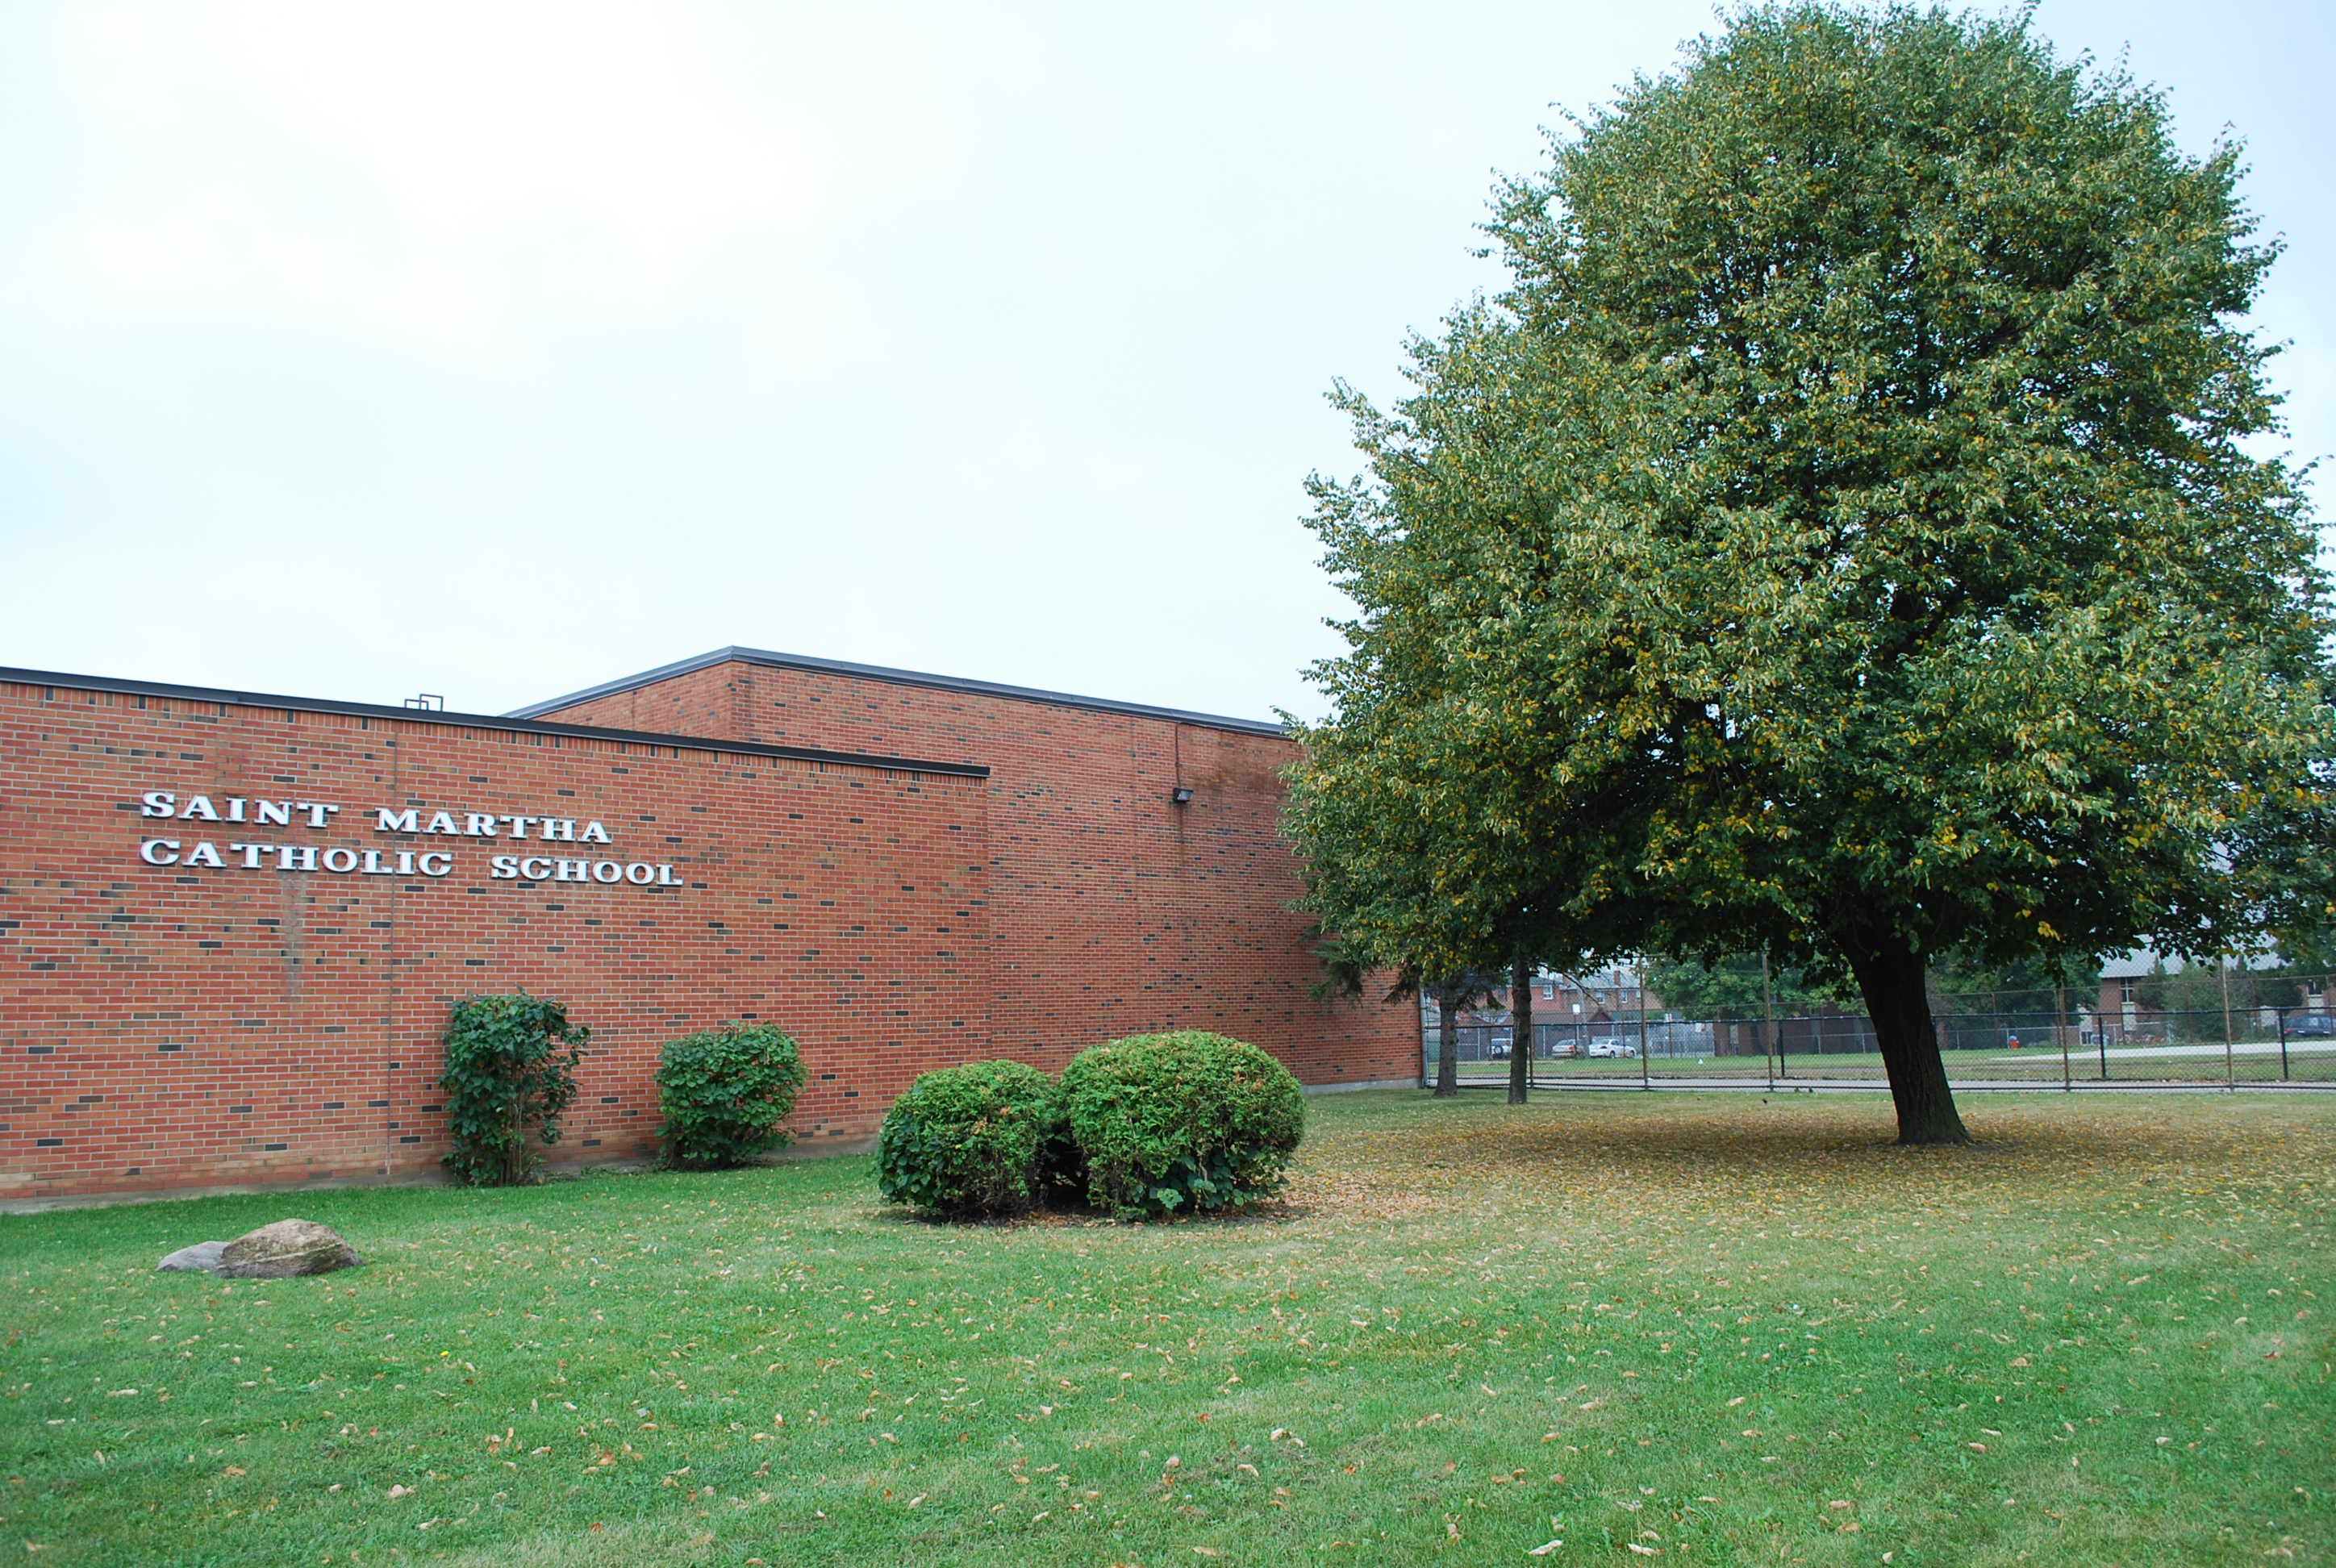 The front of the St. Martha Catholic School building.